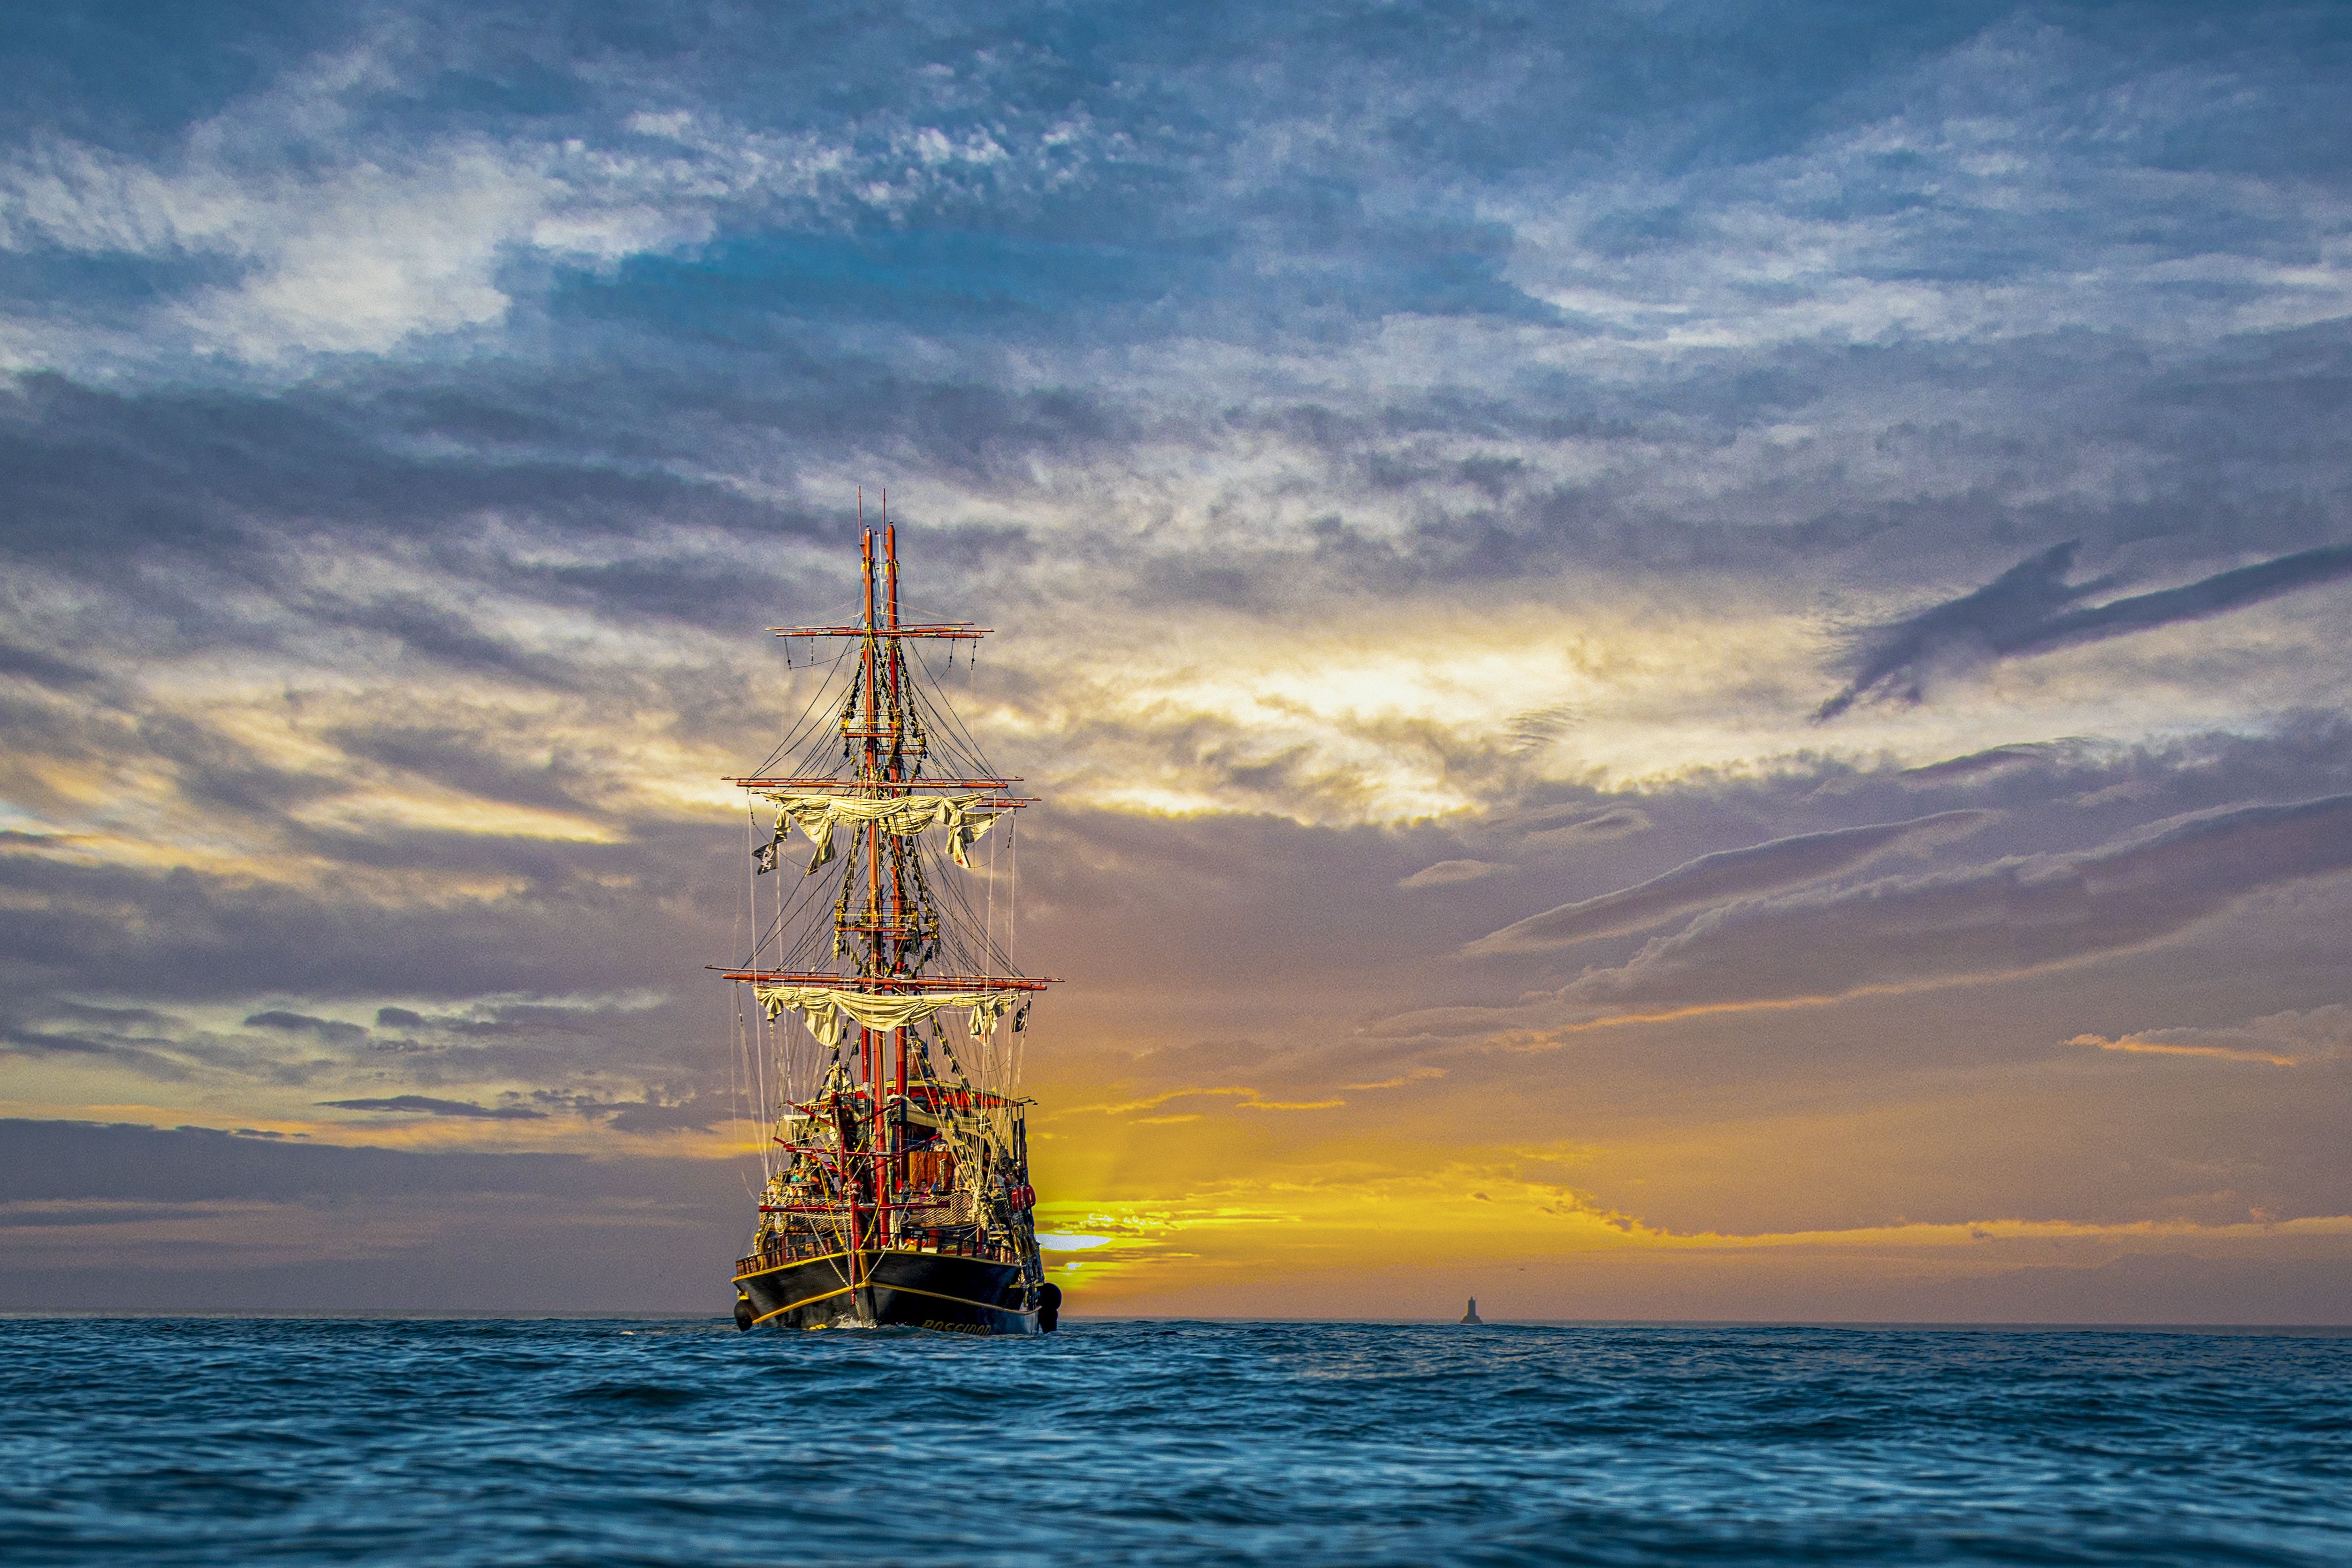 A ship sails on the ocean during a sunset. - Pirate